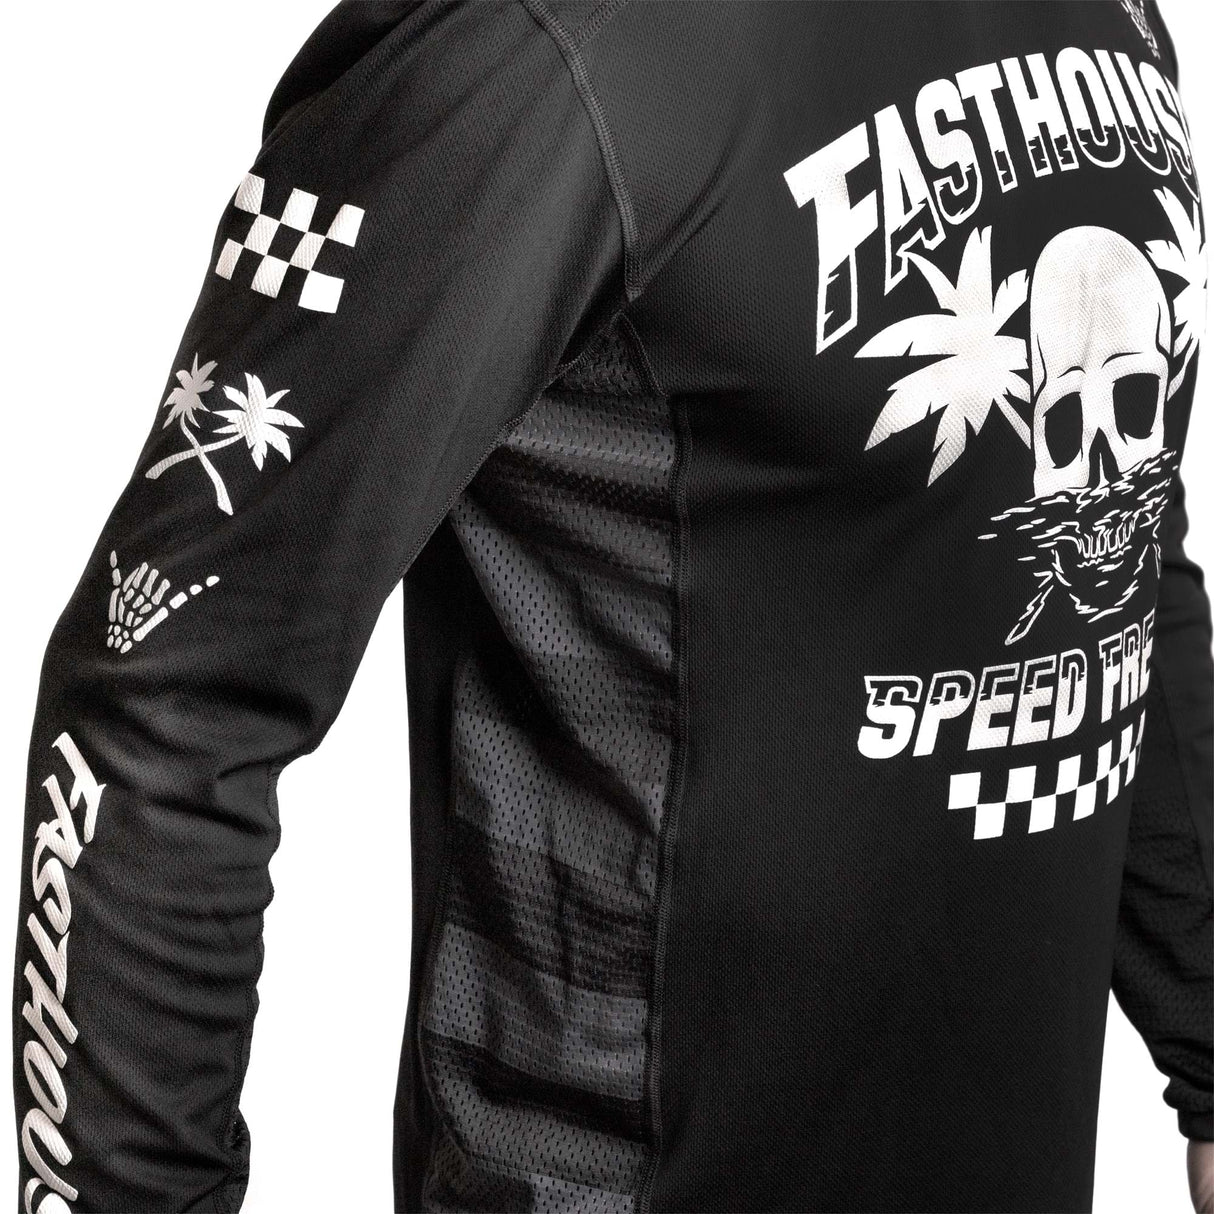 Fasthouse USA Grindhouse Subside Maillot manches longues